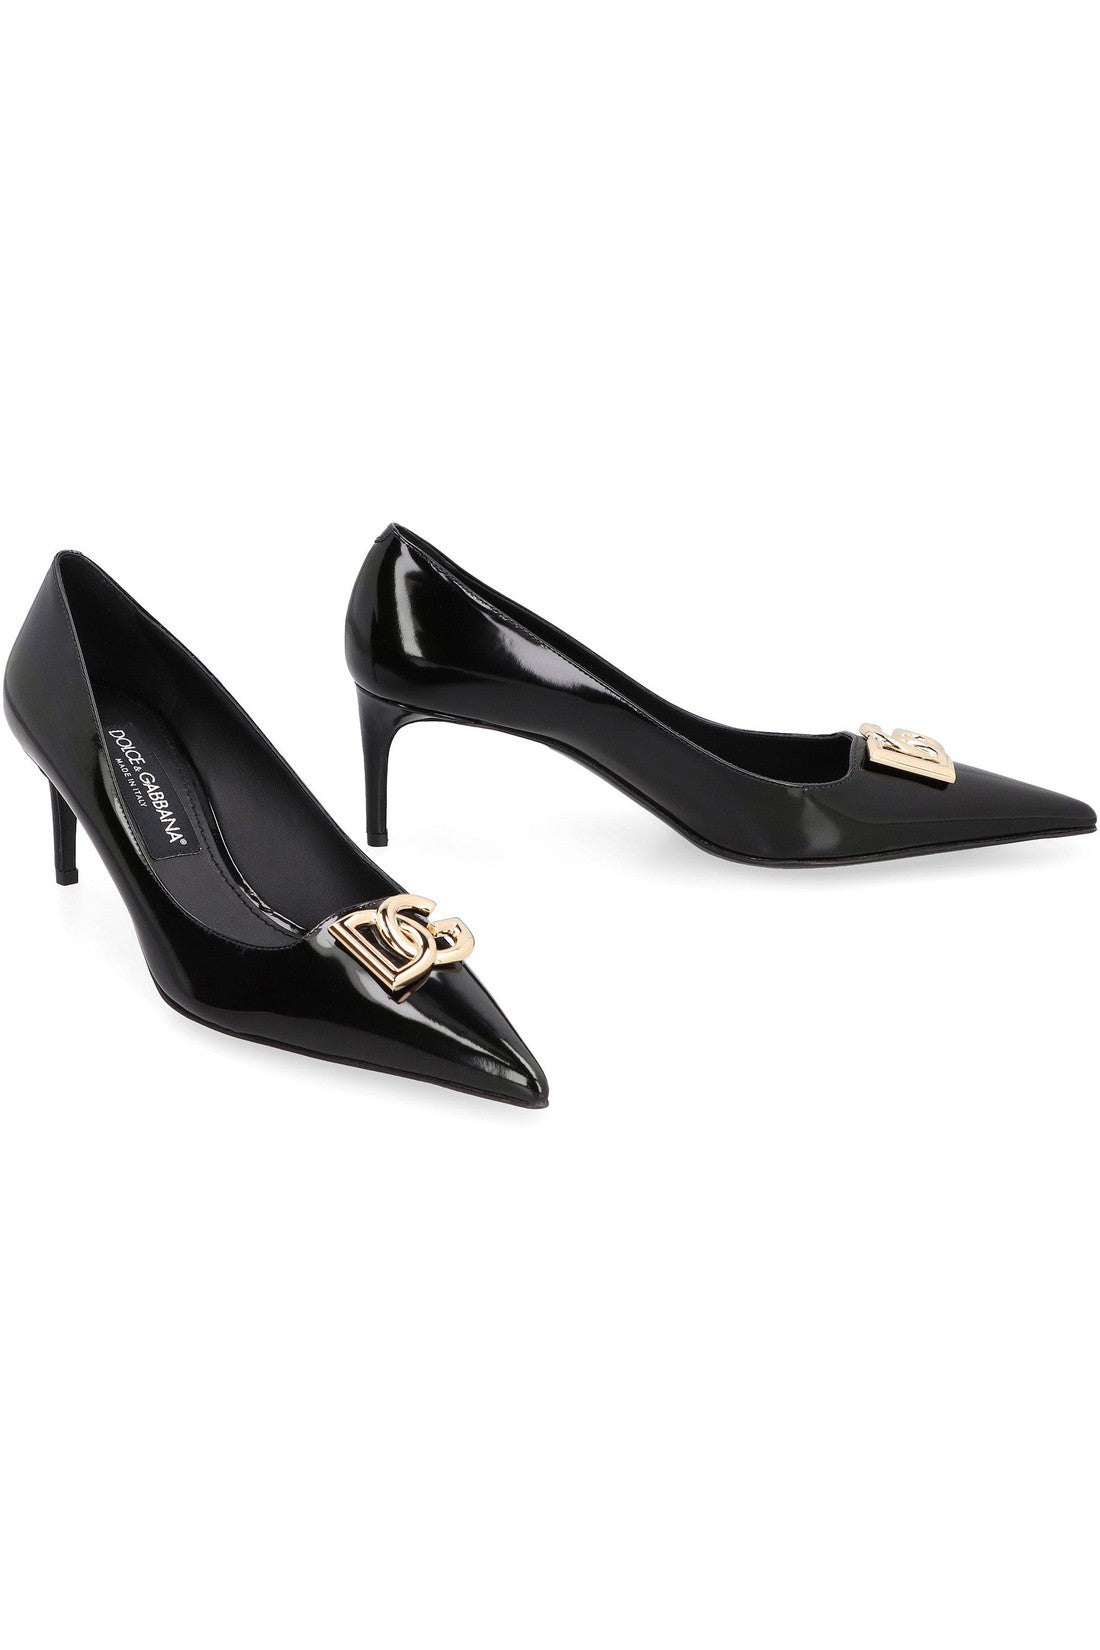 Dolce & Gabbana-OUTLET-SALE-Leather pointy-toe pumps-ARCHIVIST